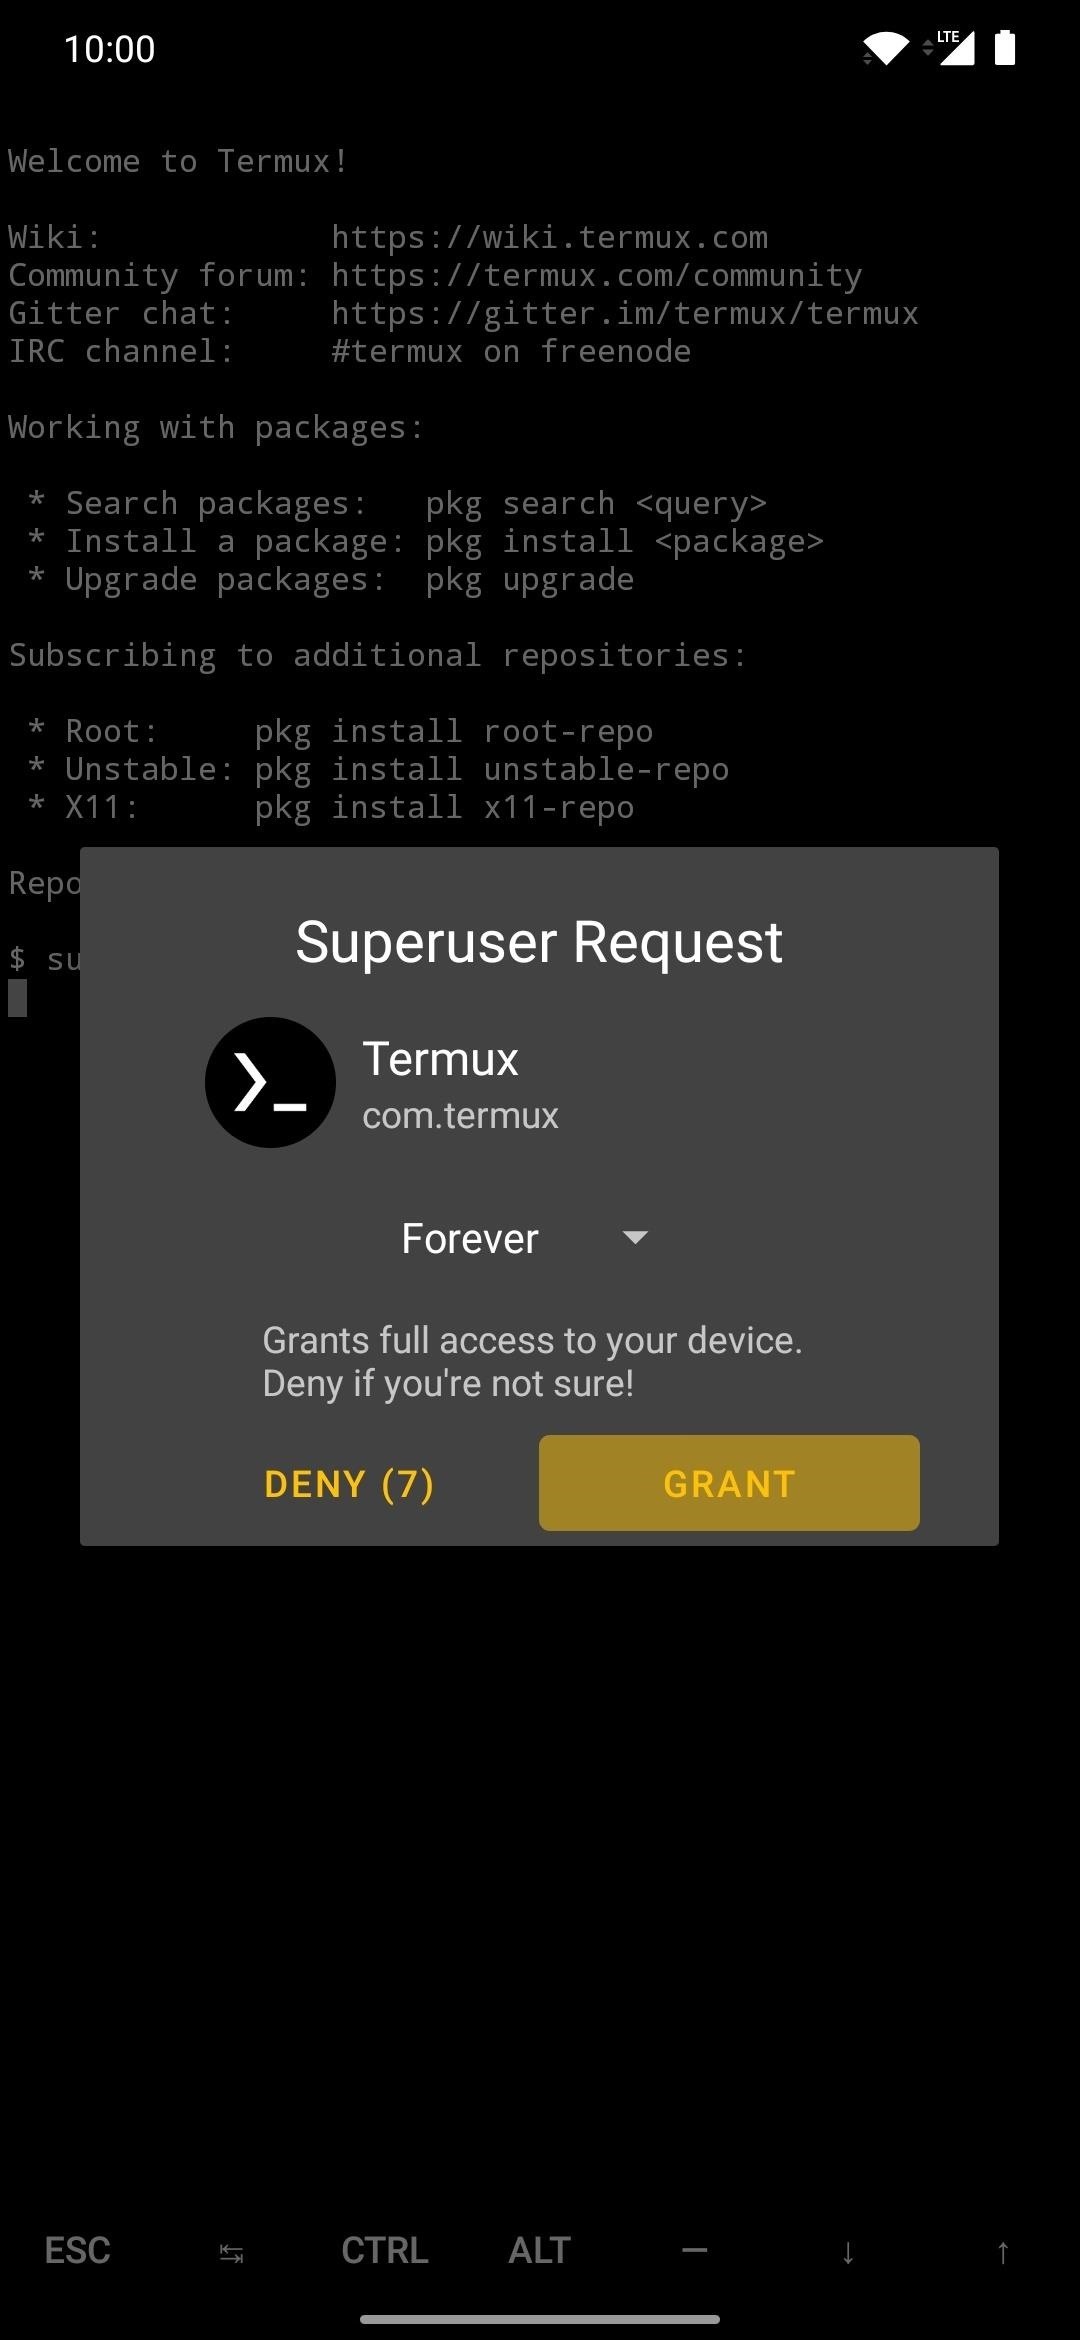 How to Install TWRP Without a Computer